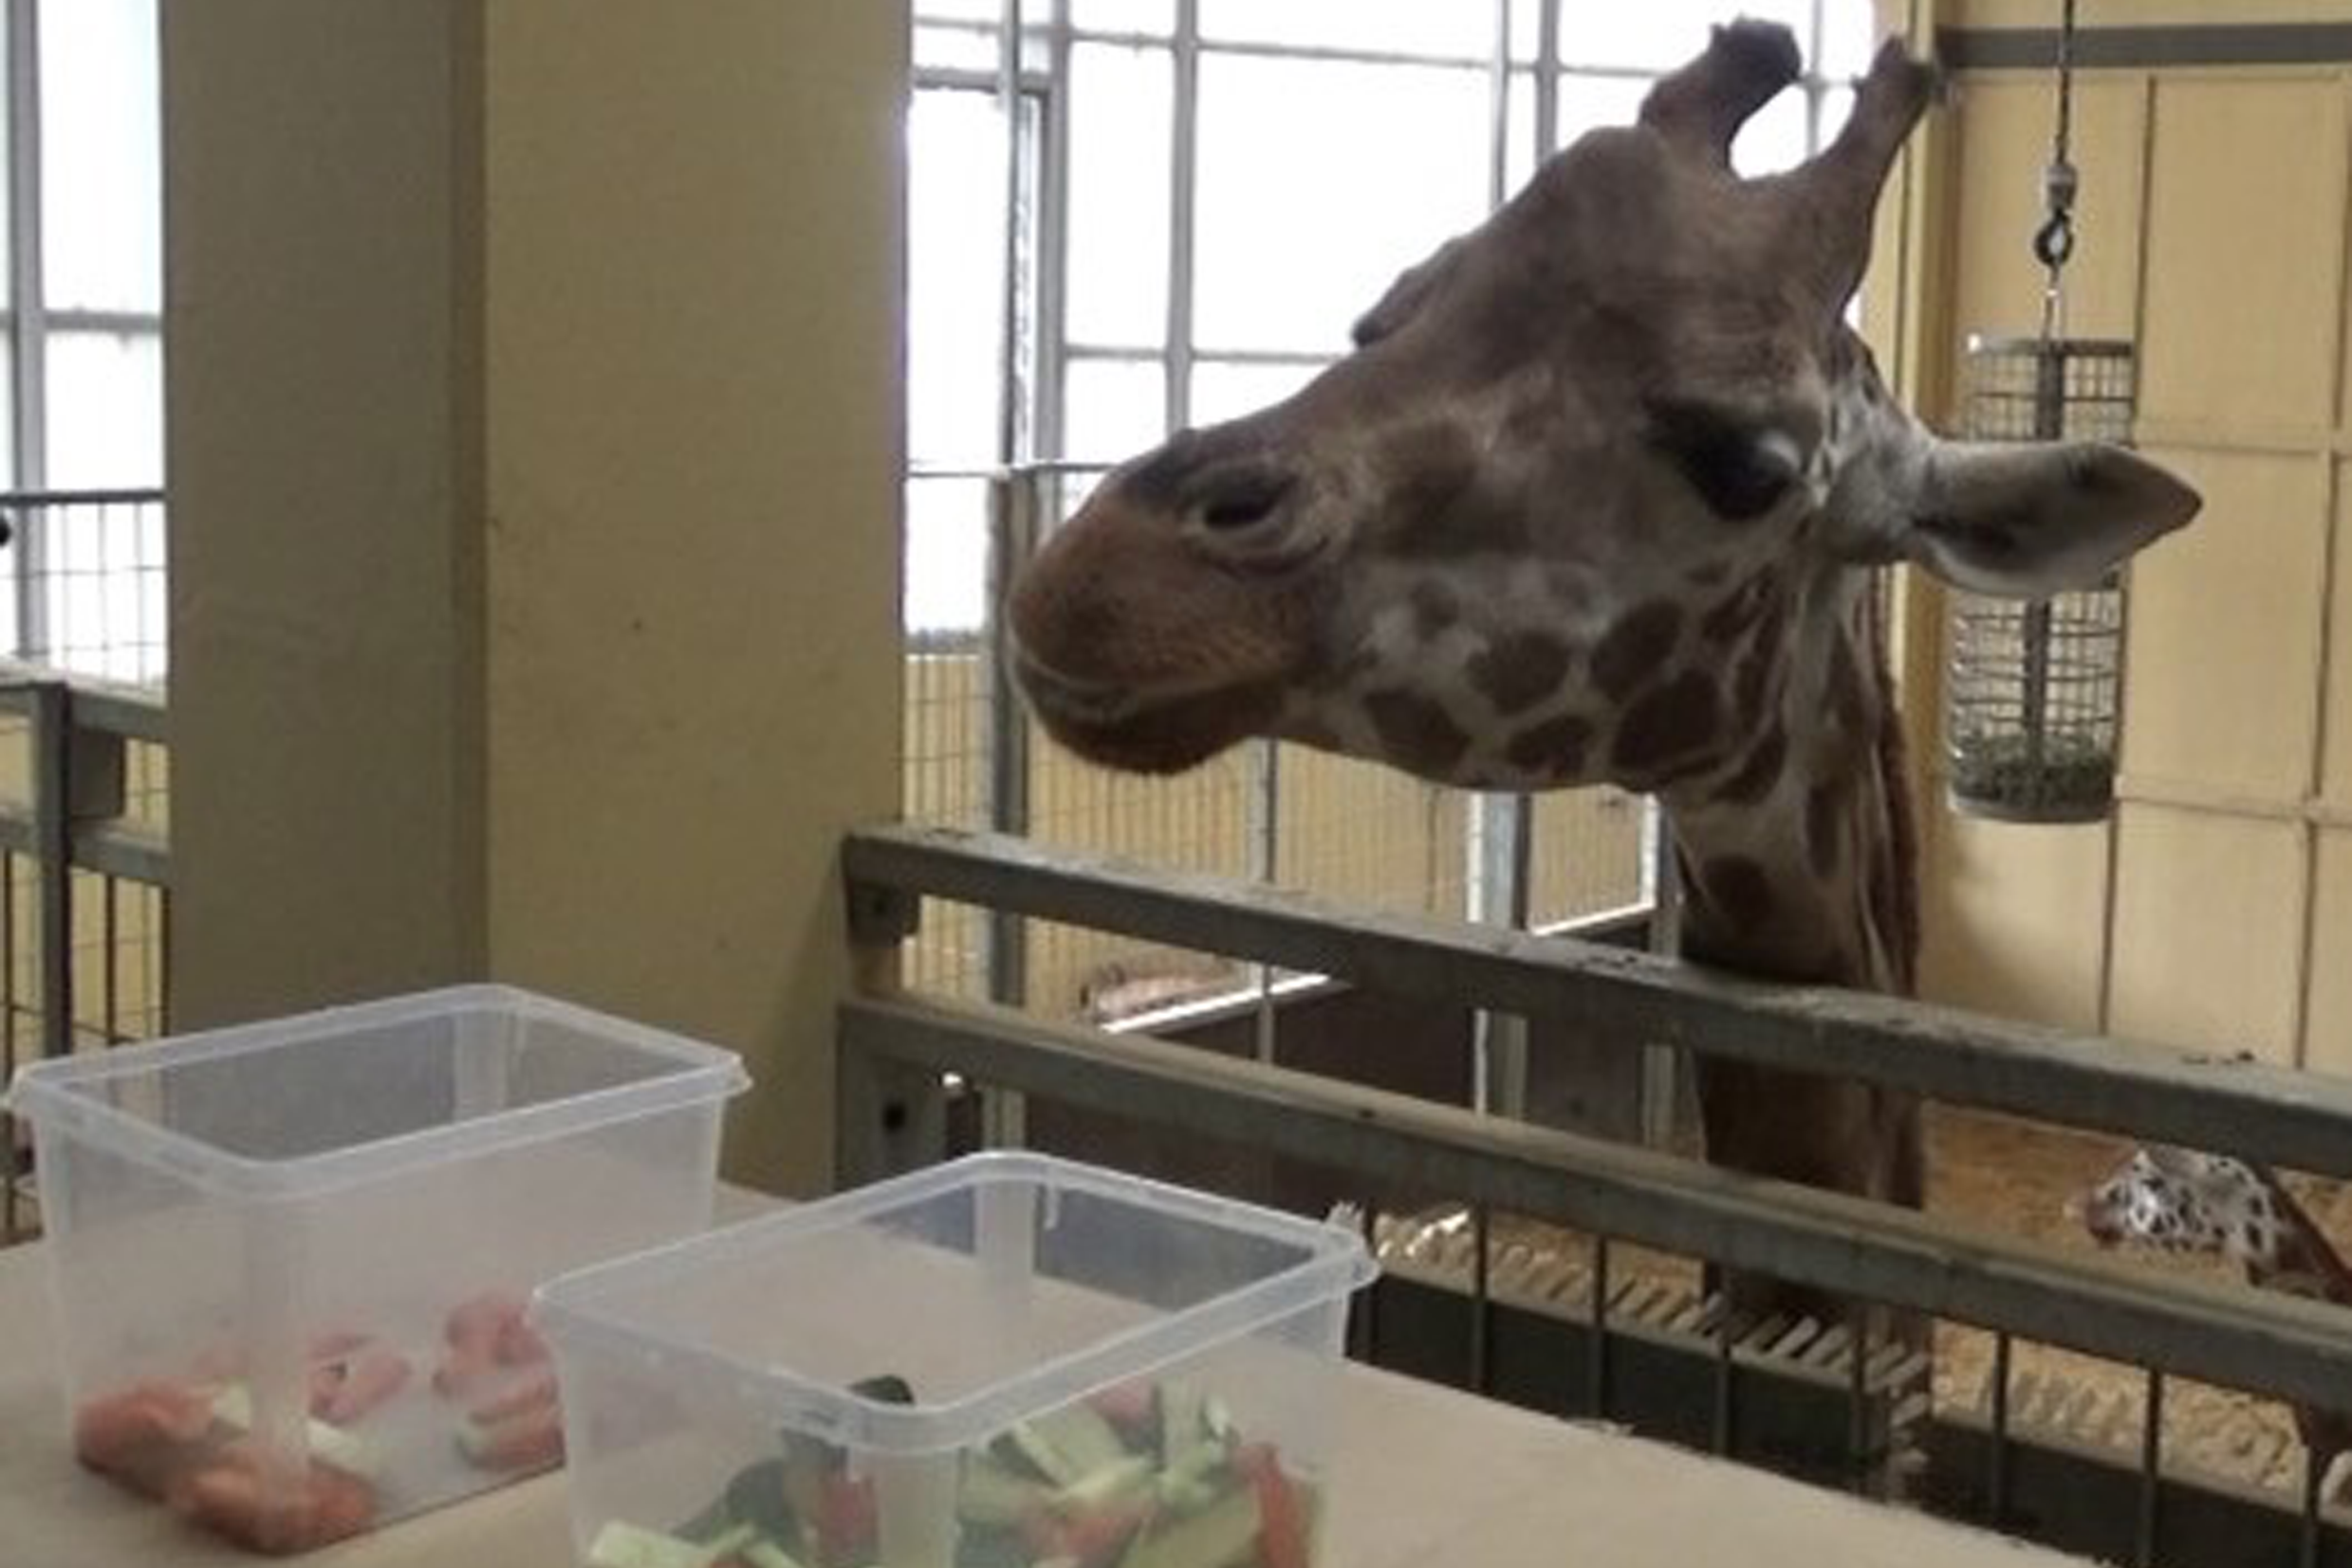 A giraffe looking at containers with vegetable sticks (Alvaro Caicoya/University of Barcelona)